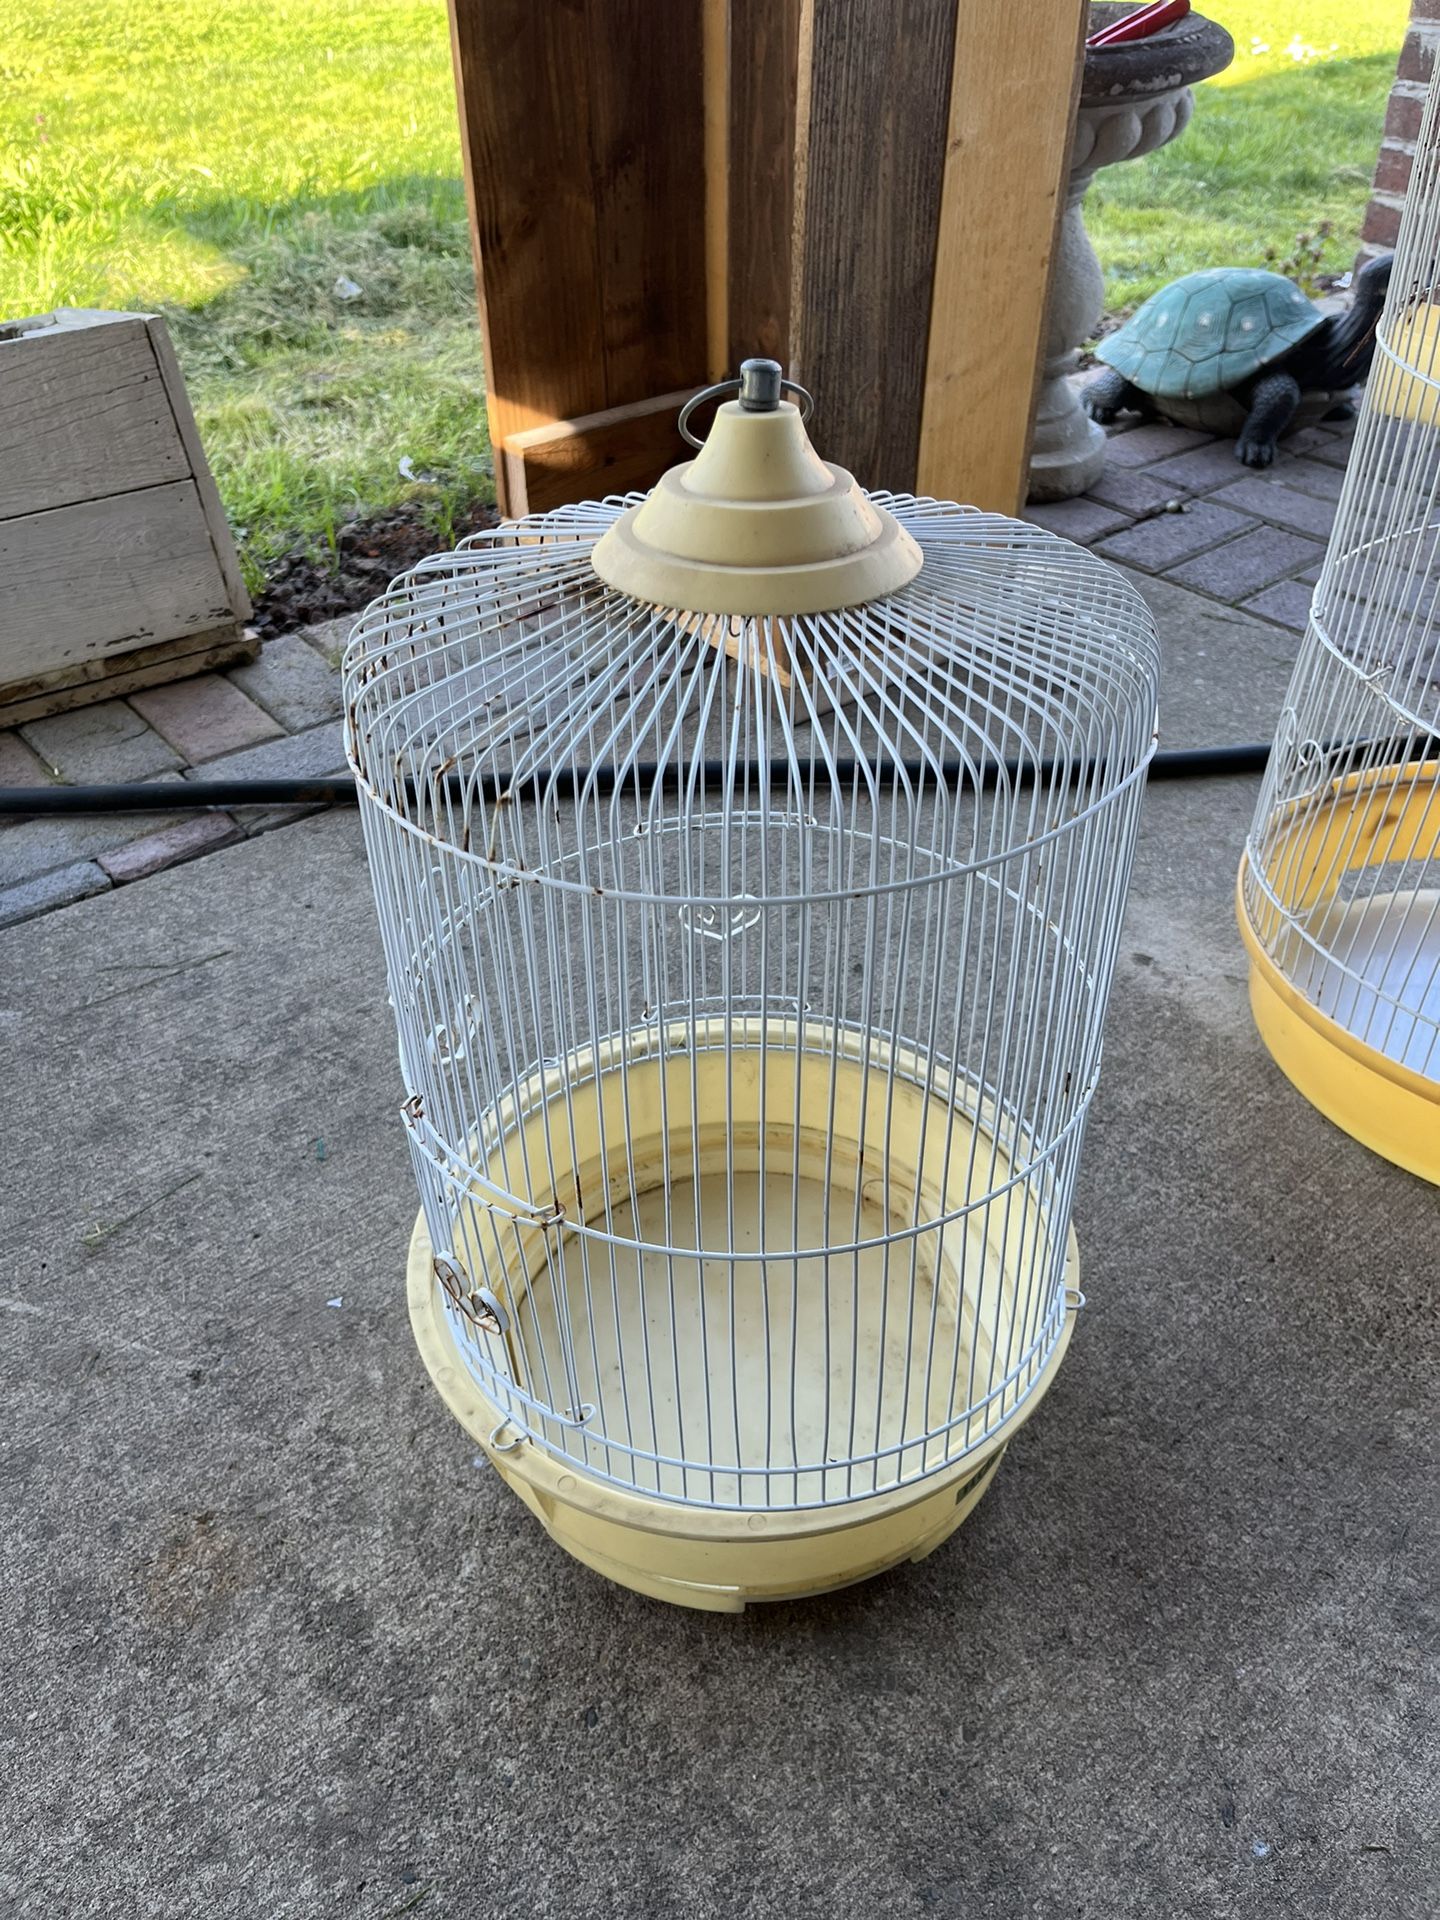 WHITE  BIRD CAGE  18 IN TALL ……12 WIDE   $10